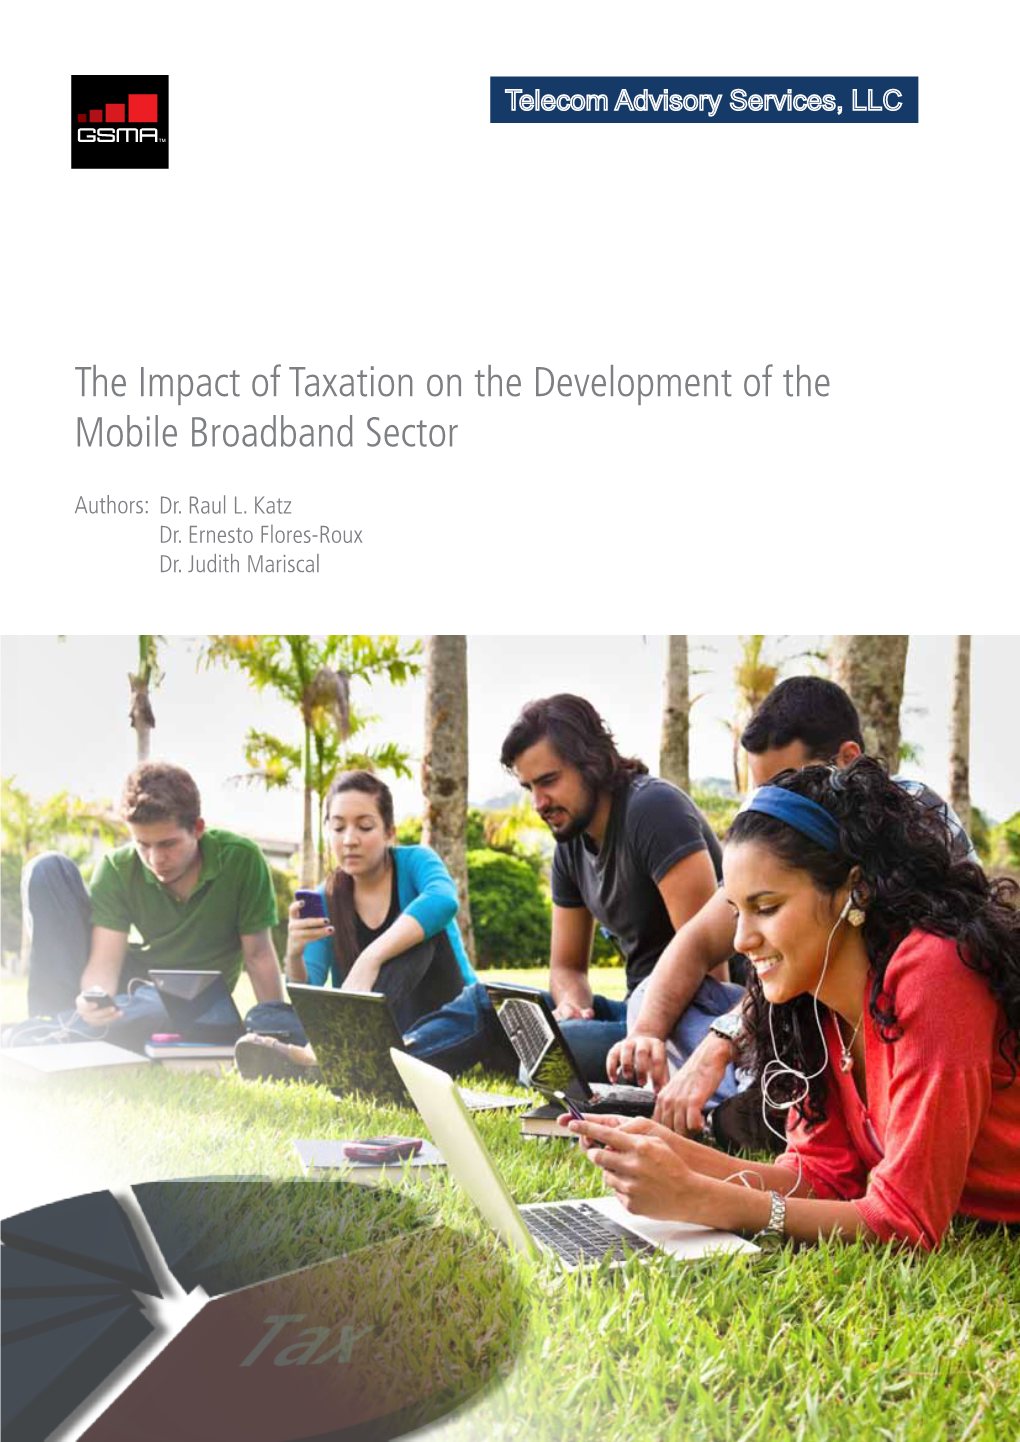 The Impact of Taxation on the Development of the Mobile Broadband Sector